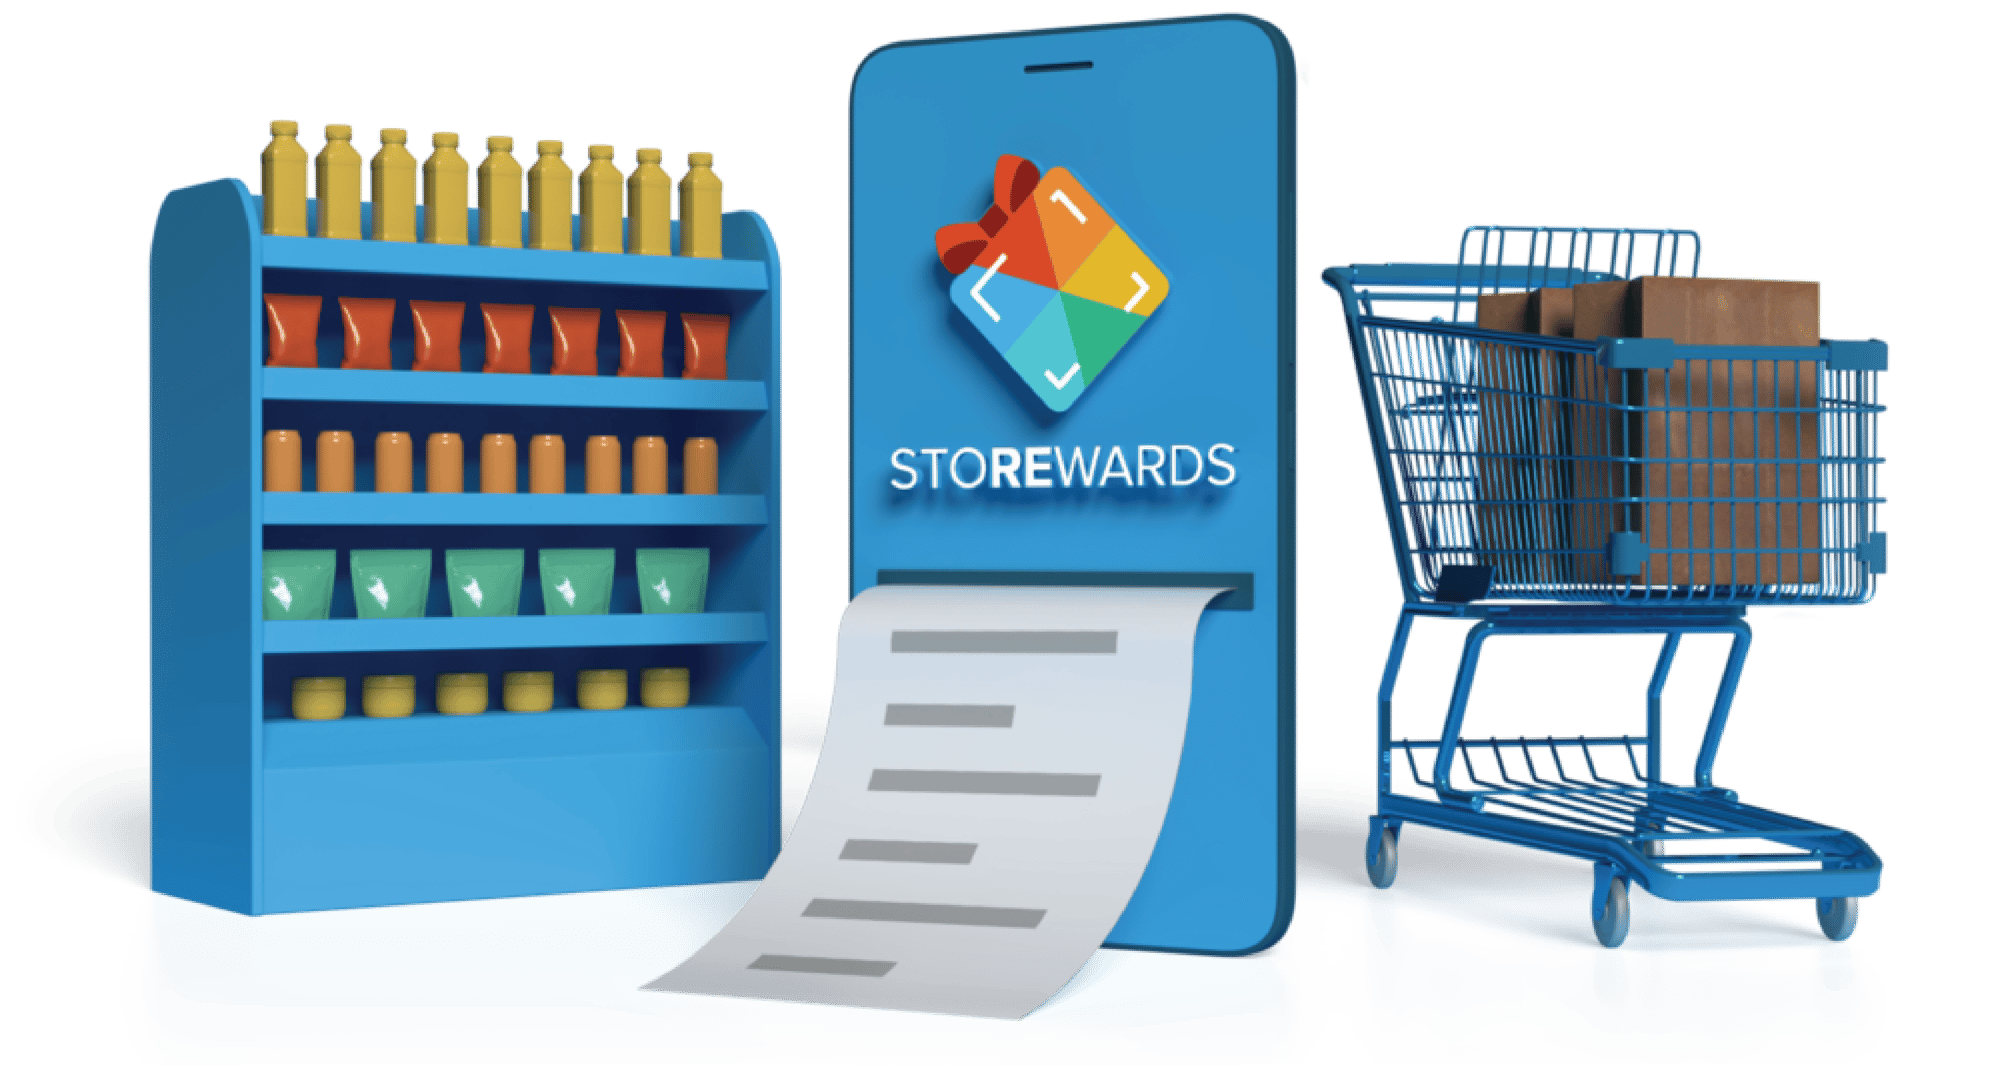 3D rendering of stocked shelf, phone, and shopping cart